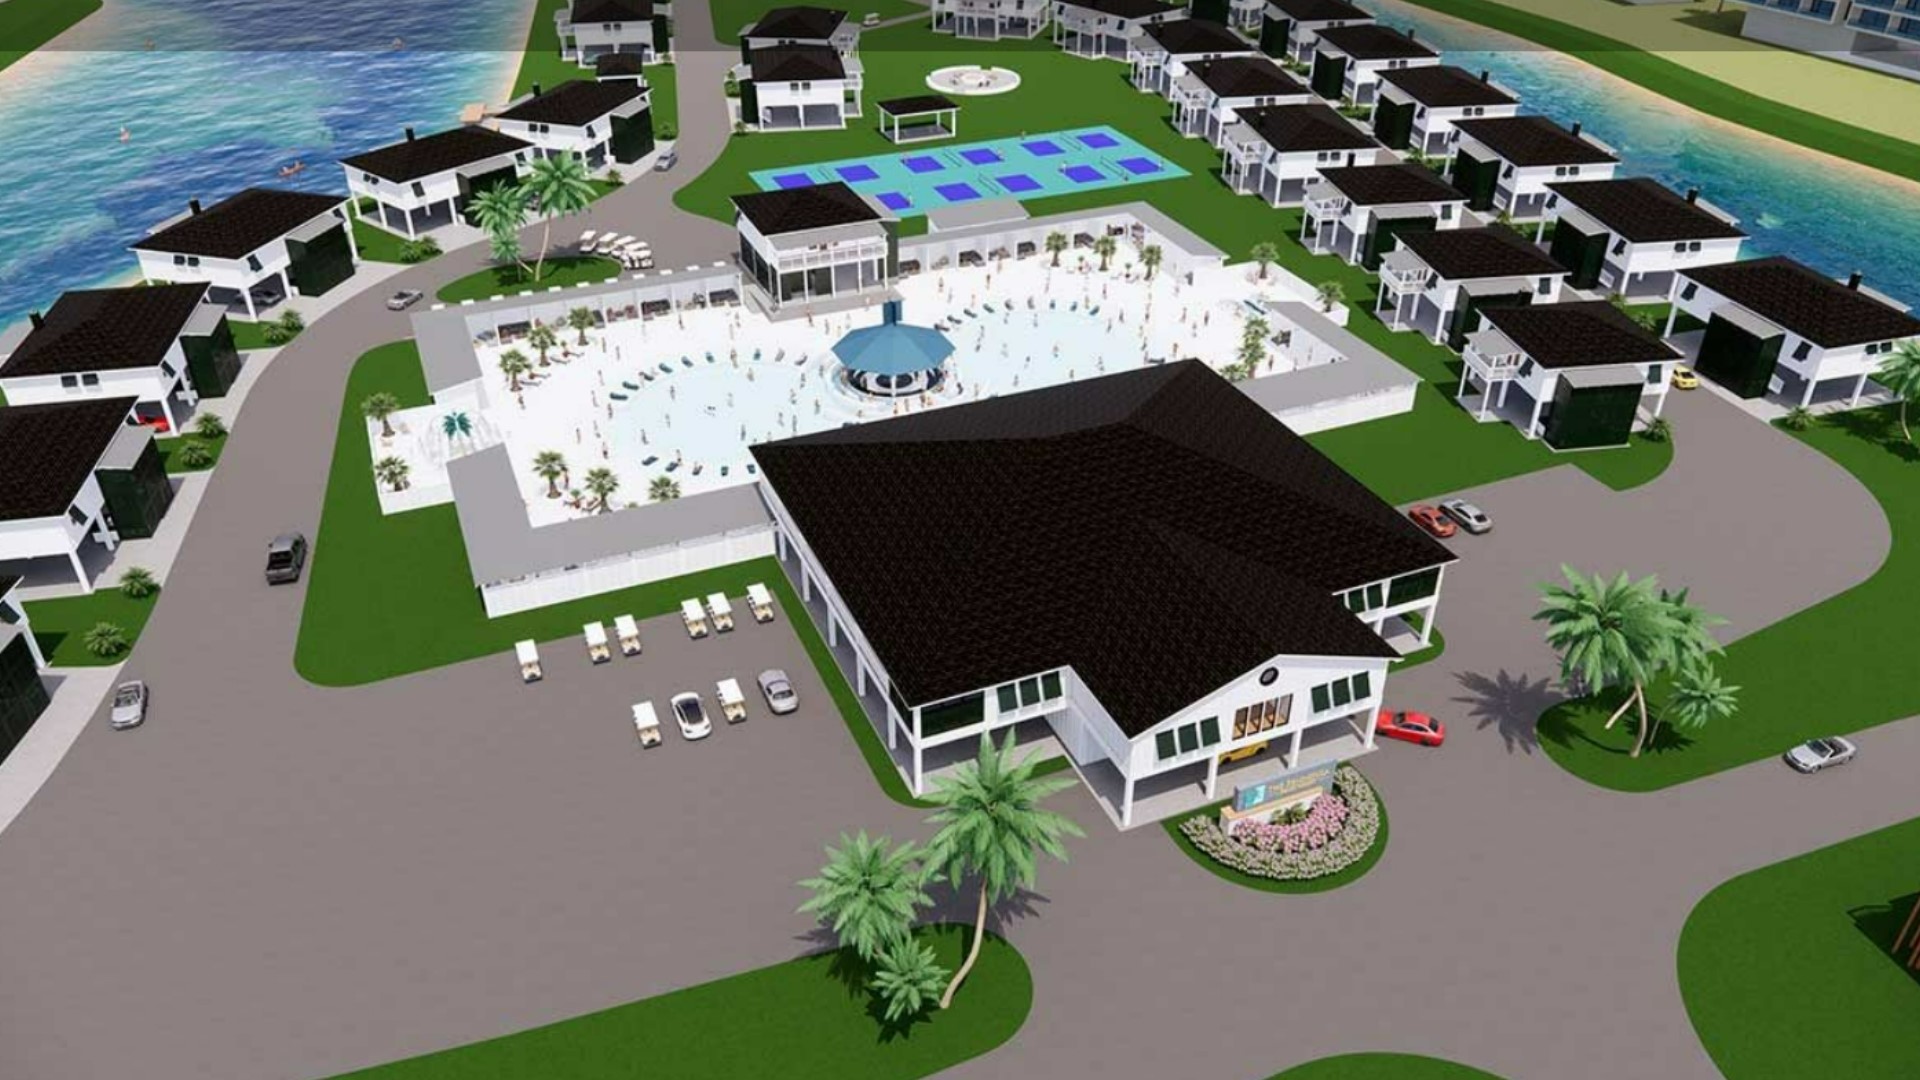 An investment group has announced a 110-acre, beachfront development that includes a beach resort and a private airport in Crystal Beach, Texas.